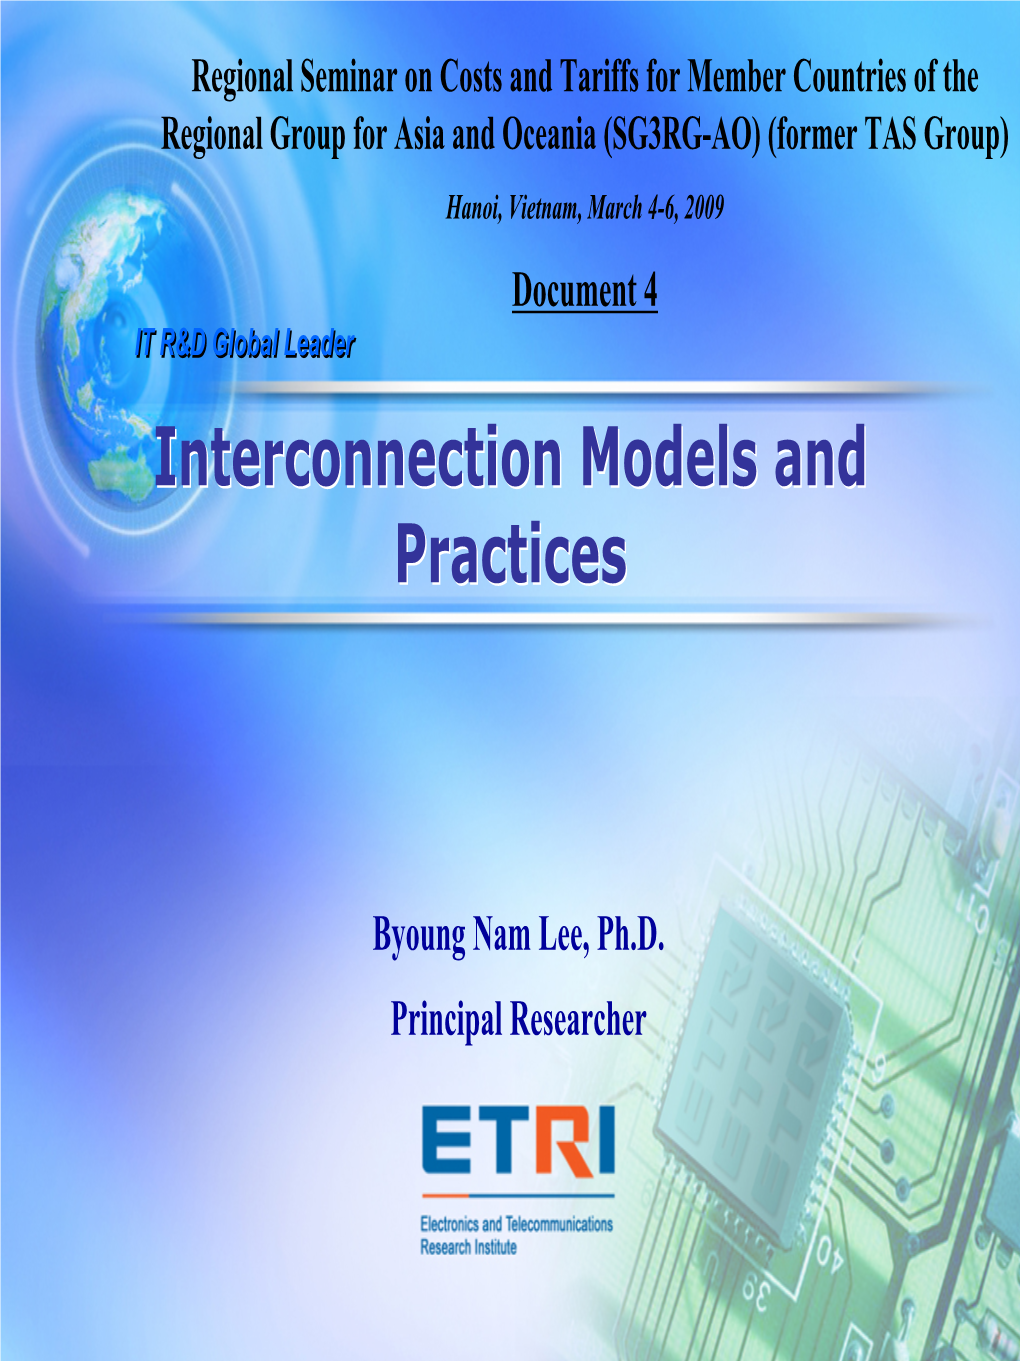 Interconnection Cost Models and Practices